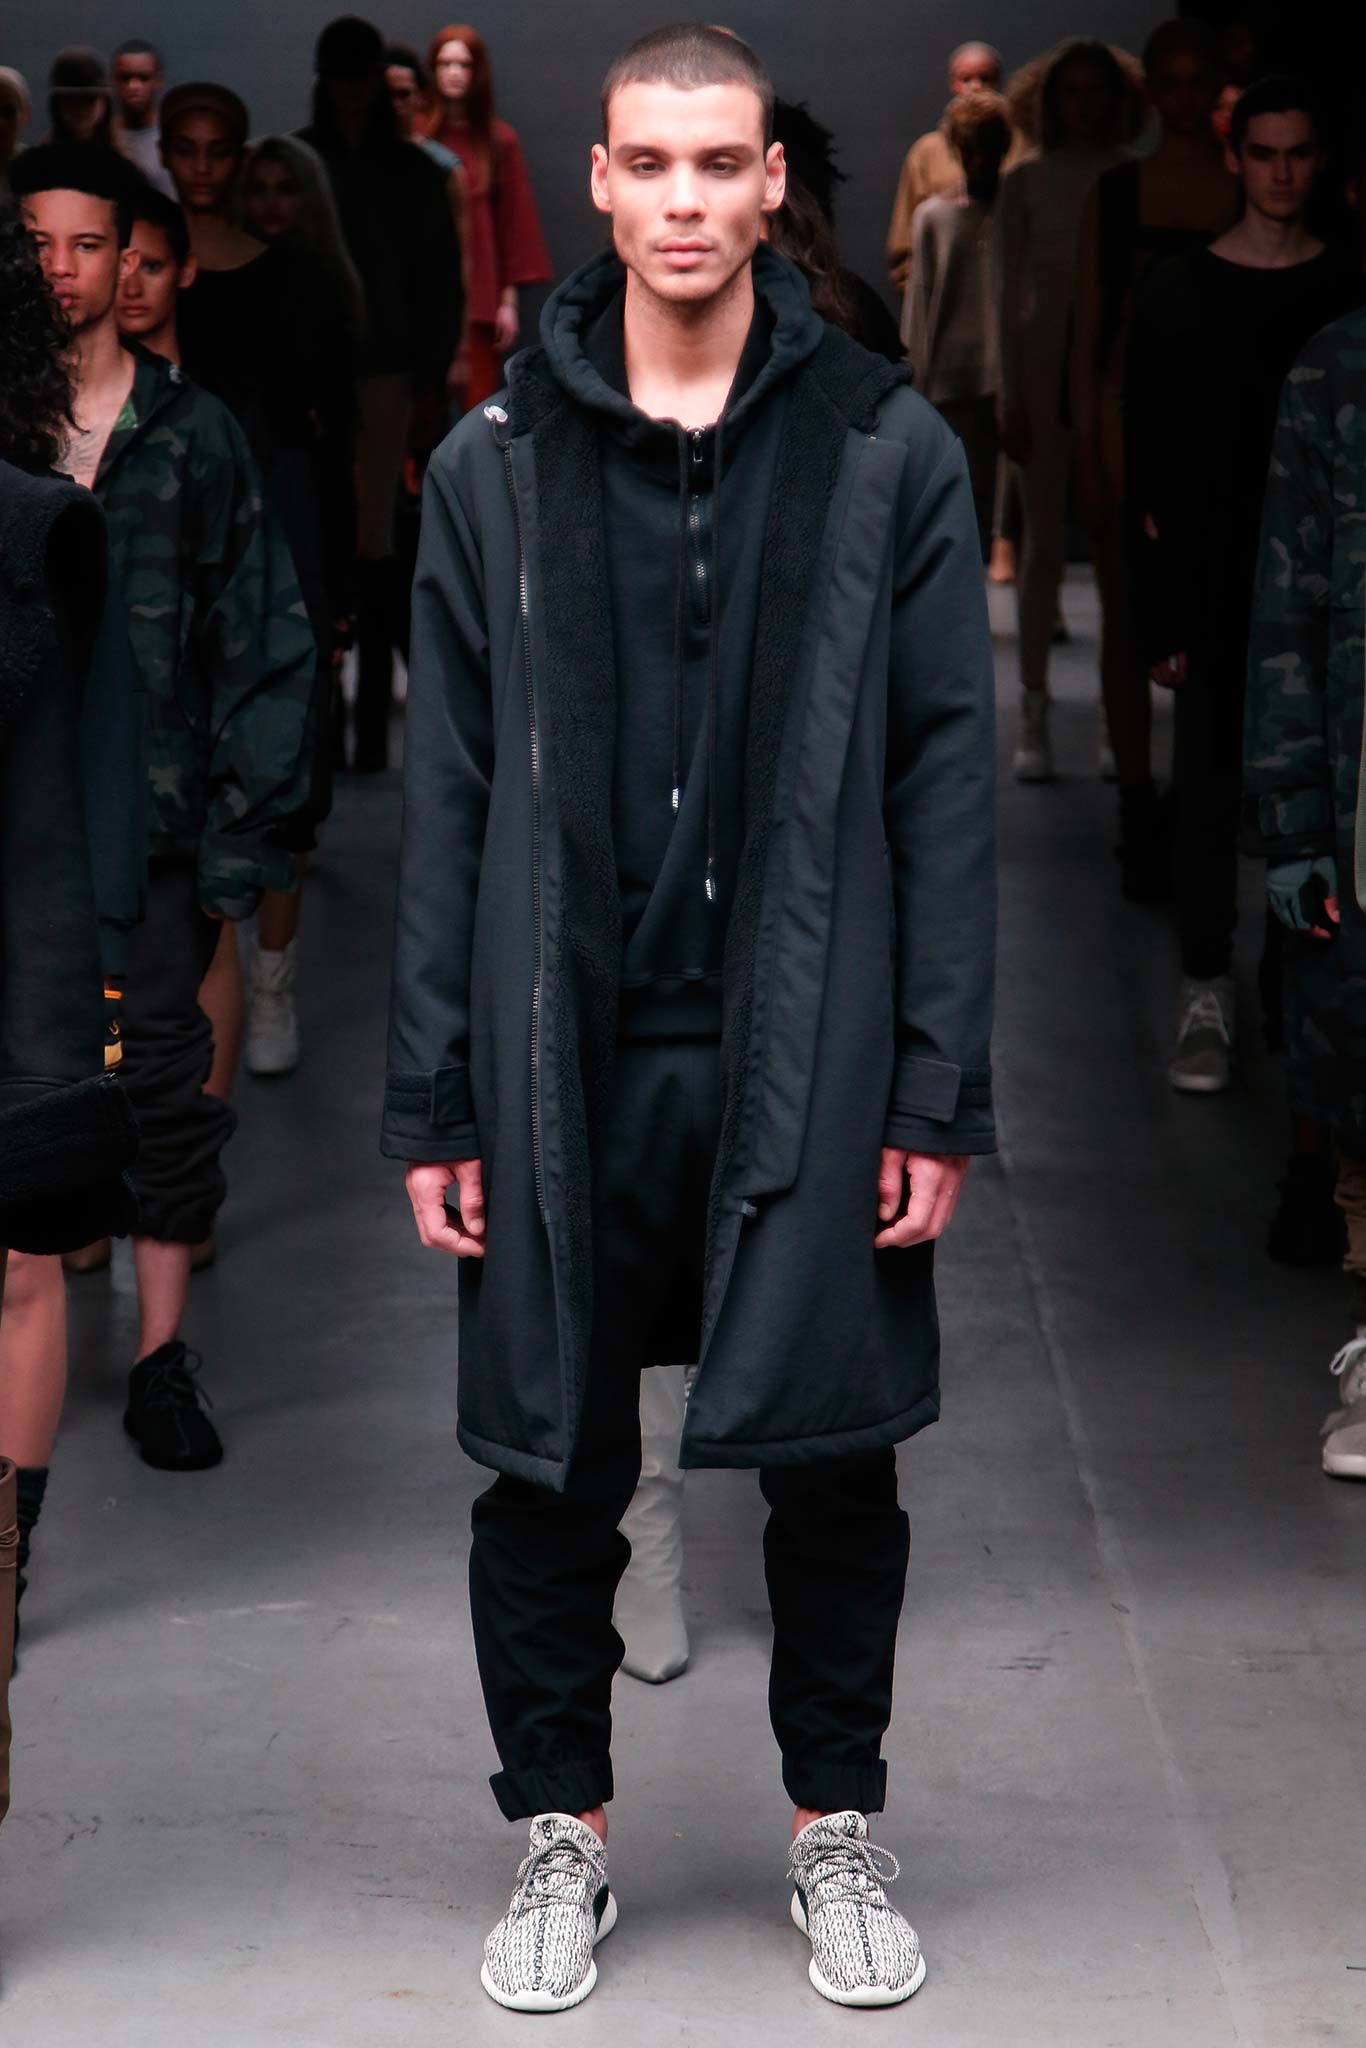 Kanye West Adidas Fall Winter 2015 Mens Collection Photos 007